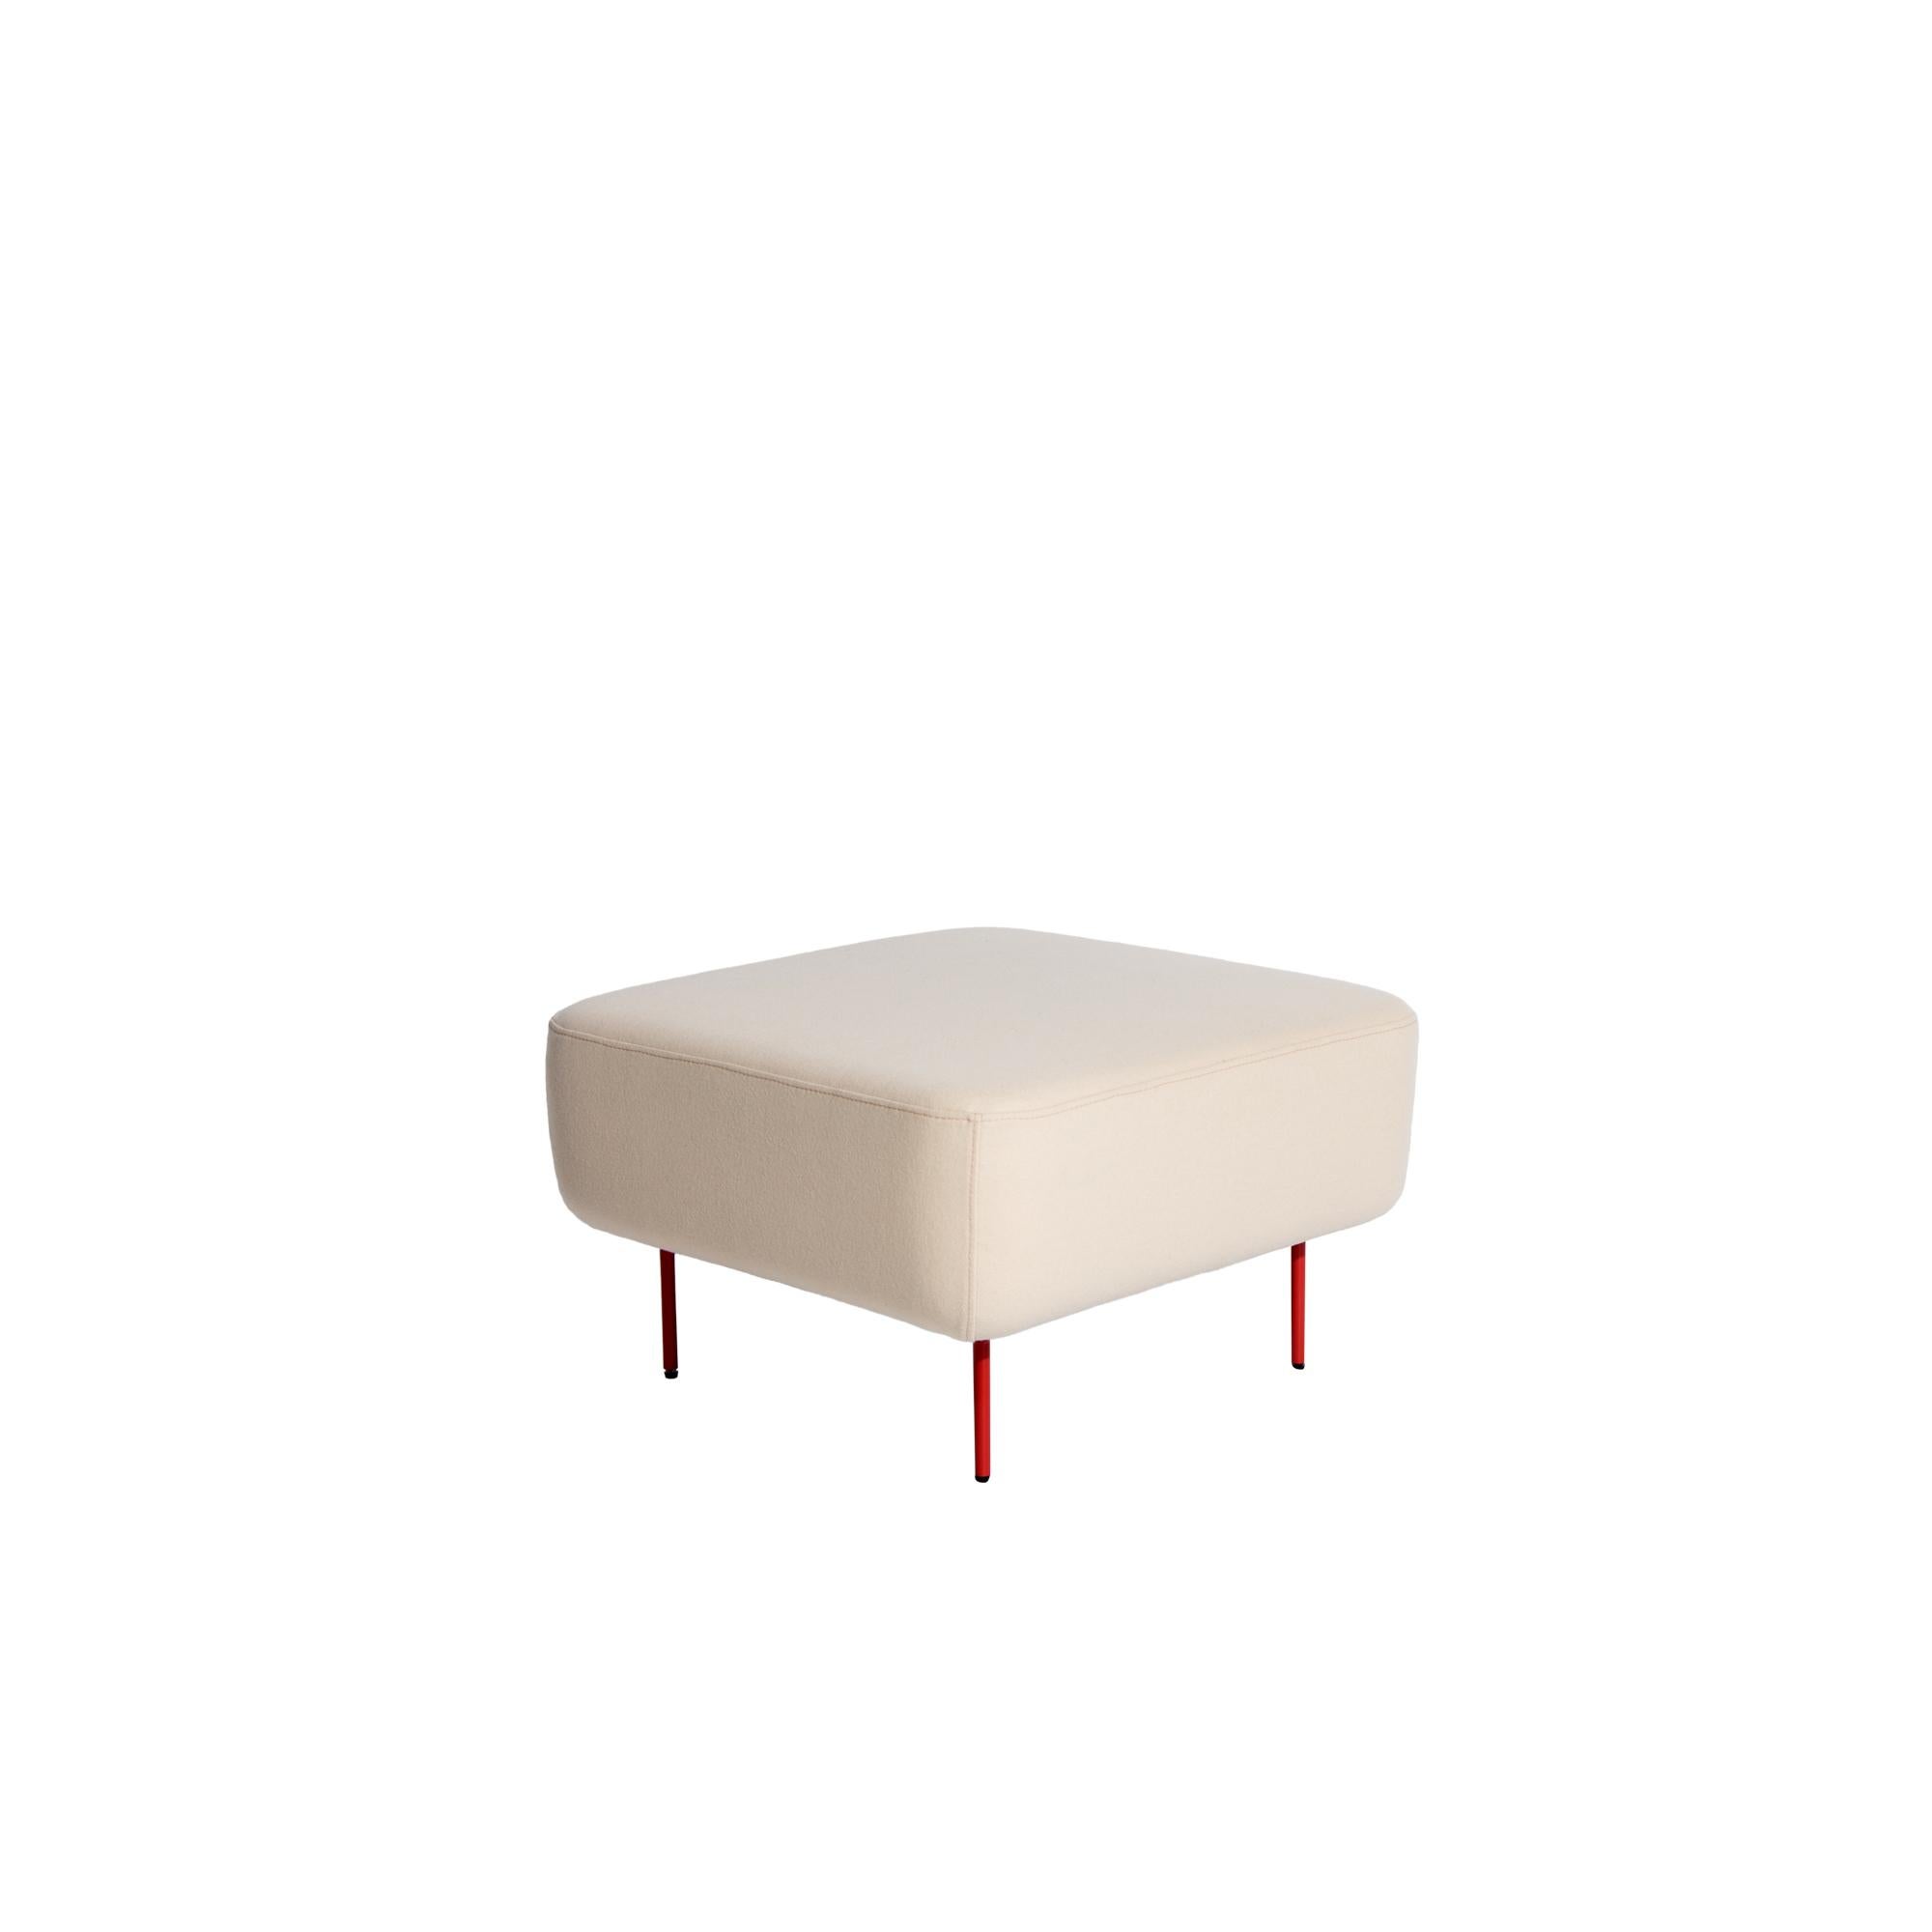 Petite Friture Medium Hoff Stool in White by Morten & Jonas, 2015

Hoff created by designer duo Morten & Jonas is a collection of two modular stools and two modular armchairs. they can combine to make a sofa as well an entire living room area.